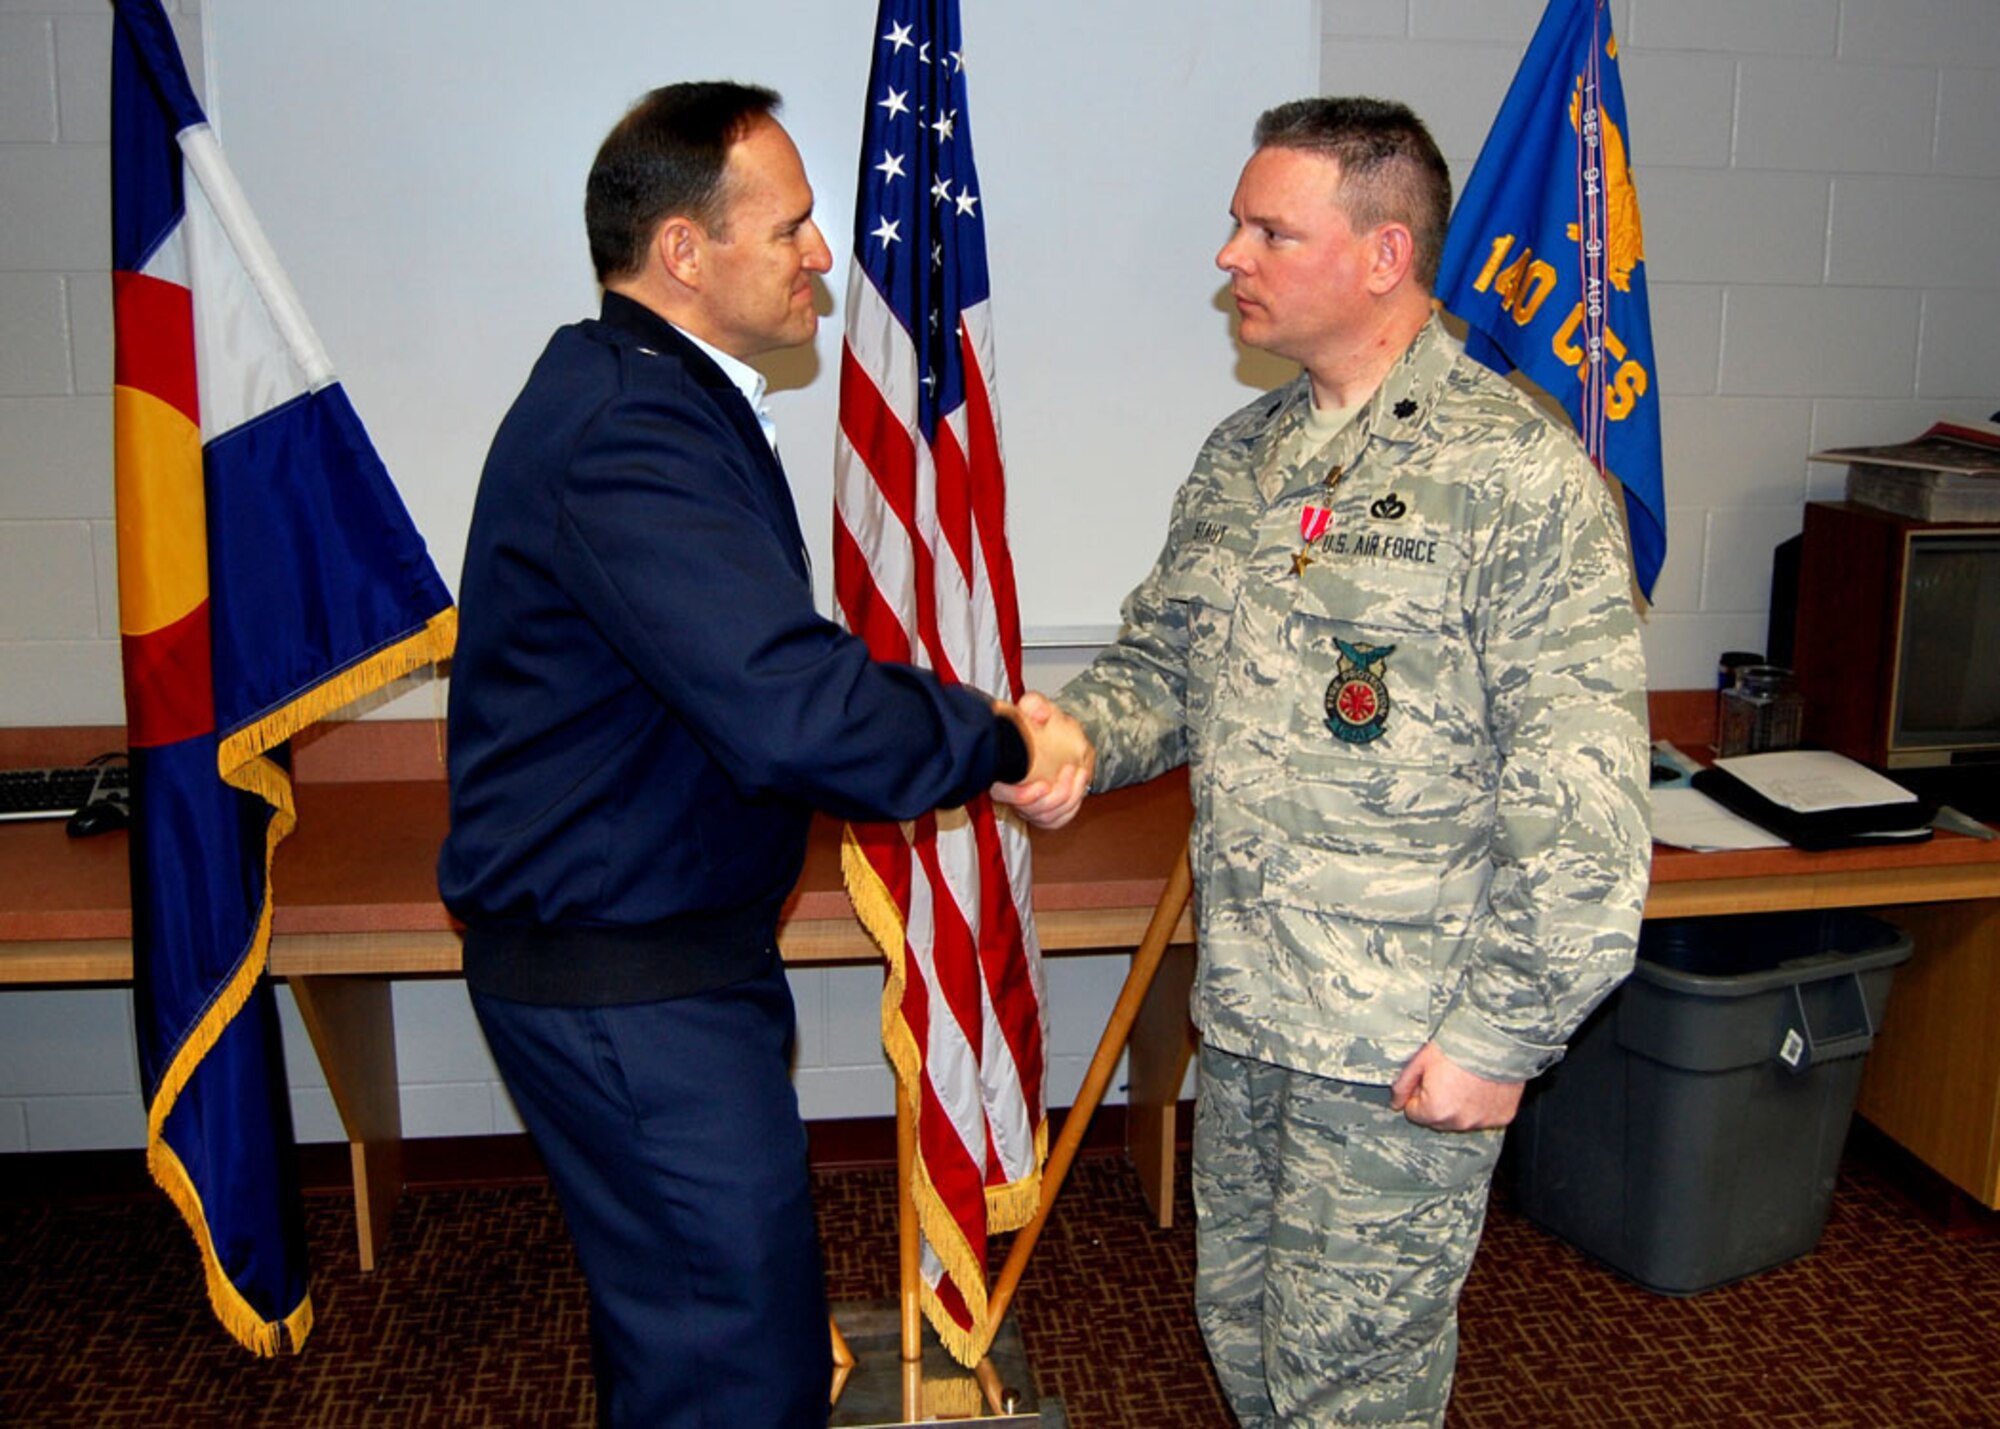 On Saturday, March 6th, Lt. Colonel Gregory Staut, Commander of the 140th Civil Engineering Squadron, was presented with the Bronze Star by 140th Wing Commander Brig. Gen. Trulan Eyre.  Staut received the medal for duties performed in support of Operation Iraqi Freedom as commander of Facility Engineering Detachment 4, 732nd Air Expeditionary Group, 332nd Air Expeditionary Wing, Balad Air Base, Iraq. (Air Force Photo by Master Sgt. Rochell Smith, 140th Wing Public Affairs)